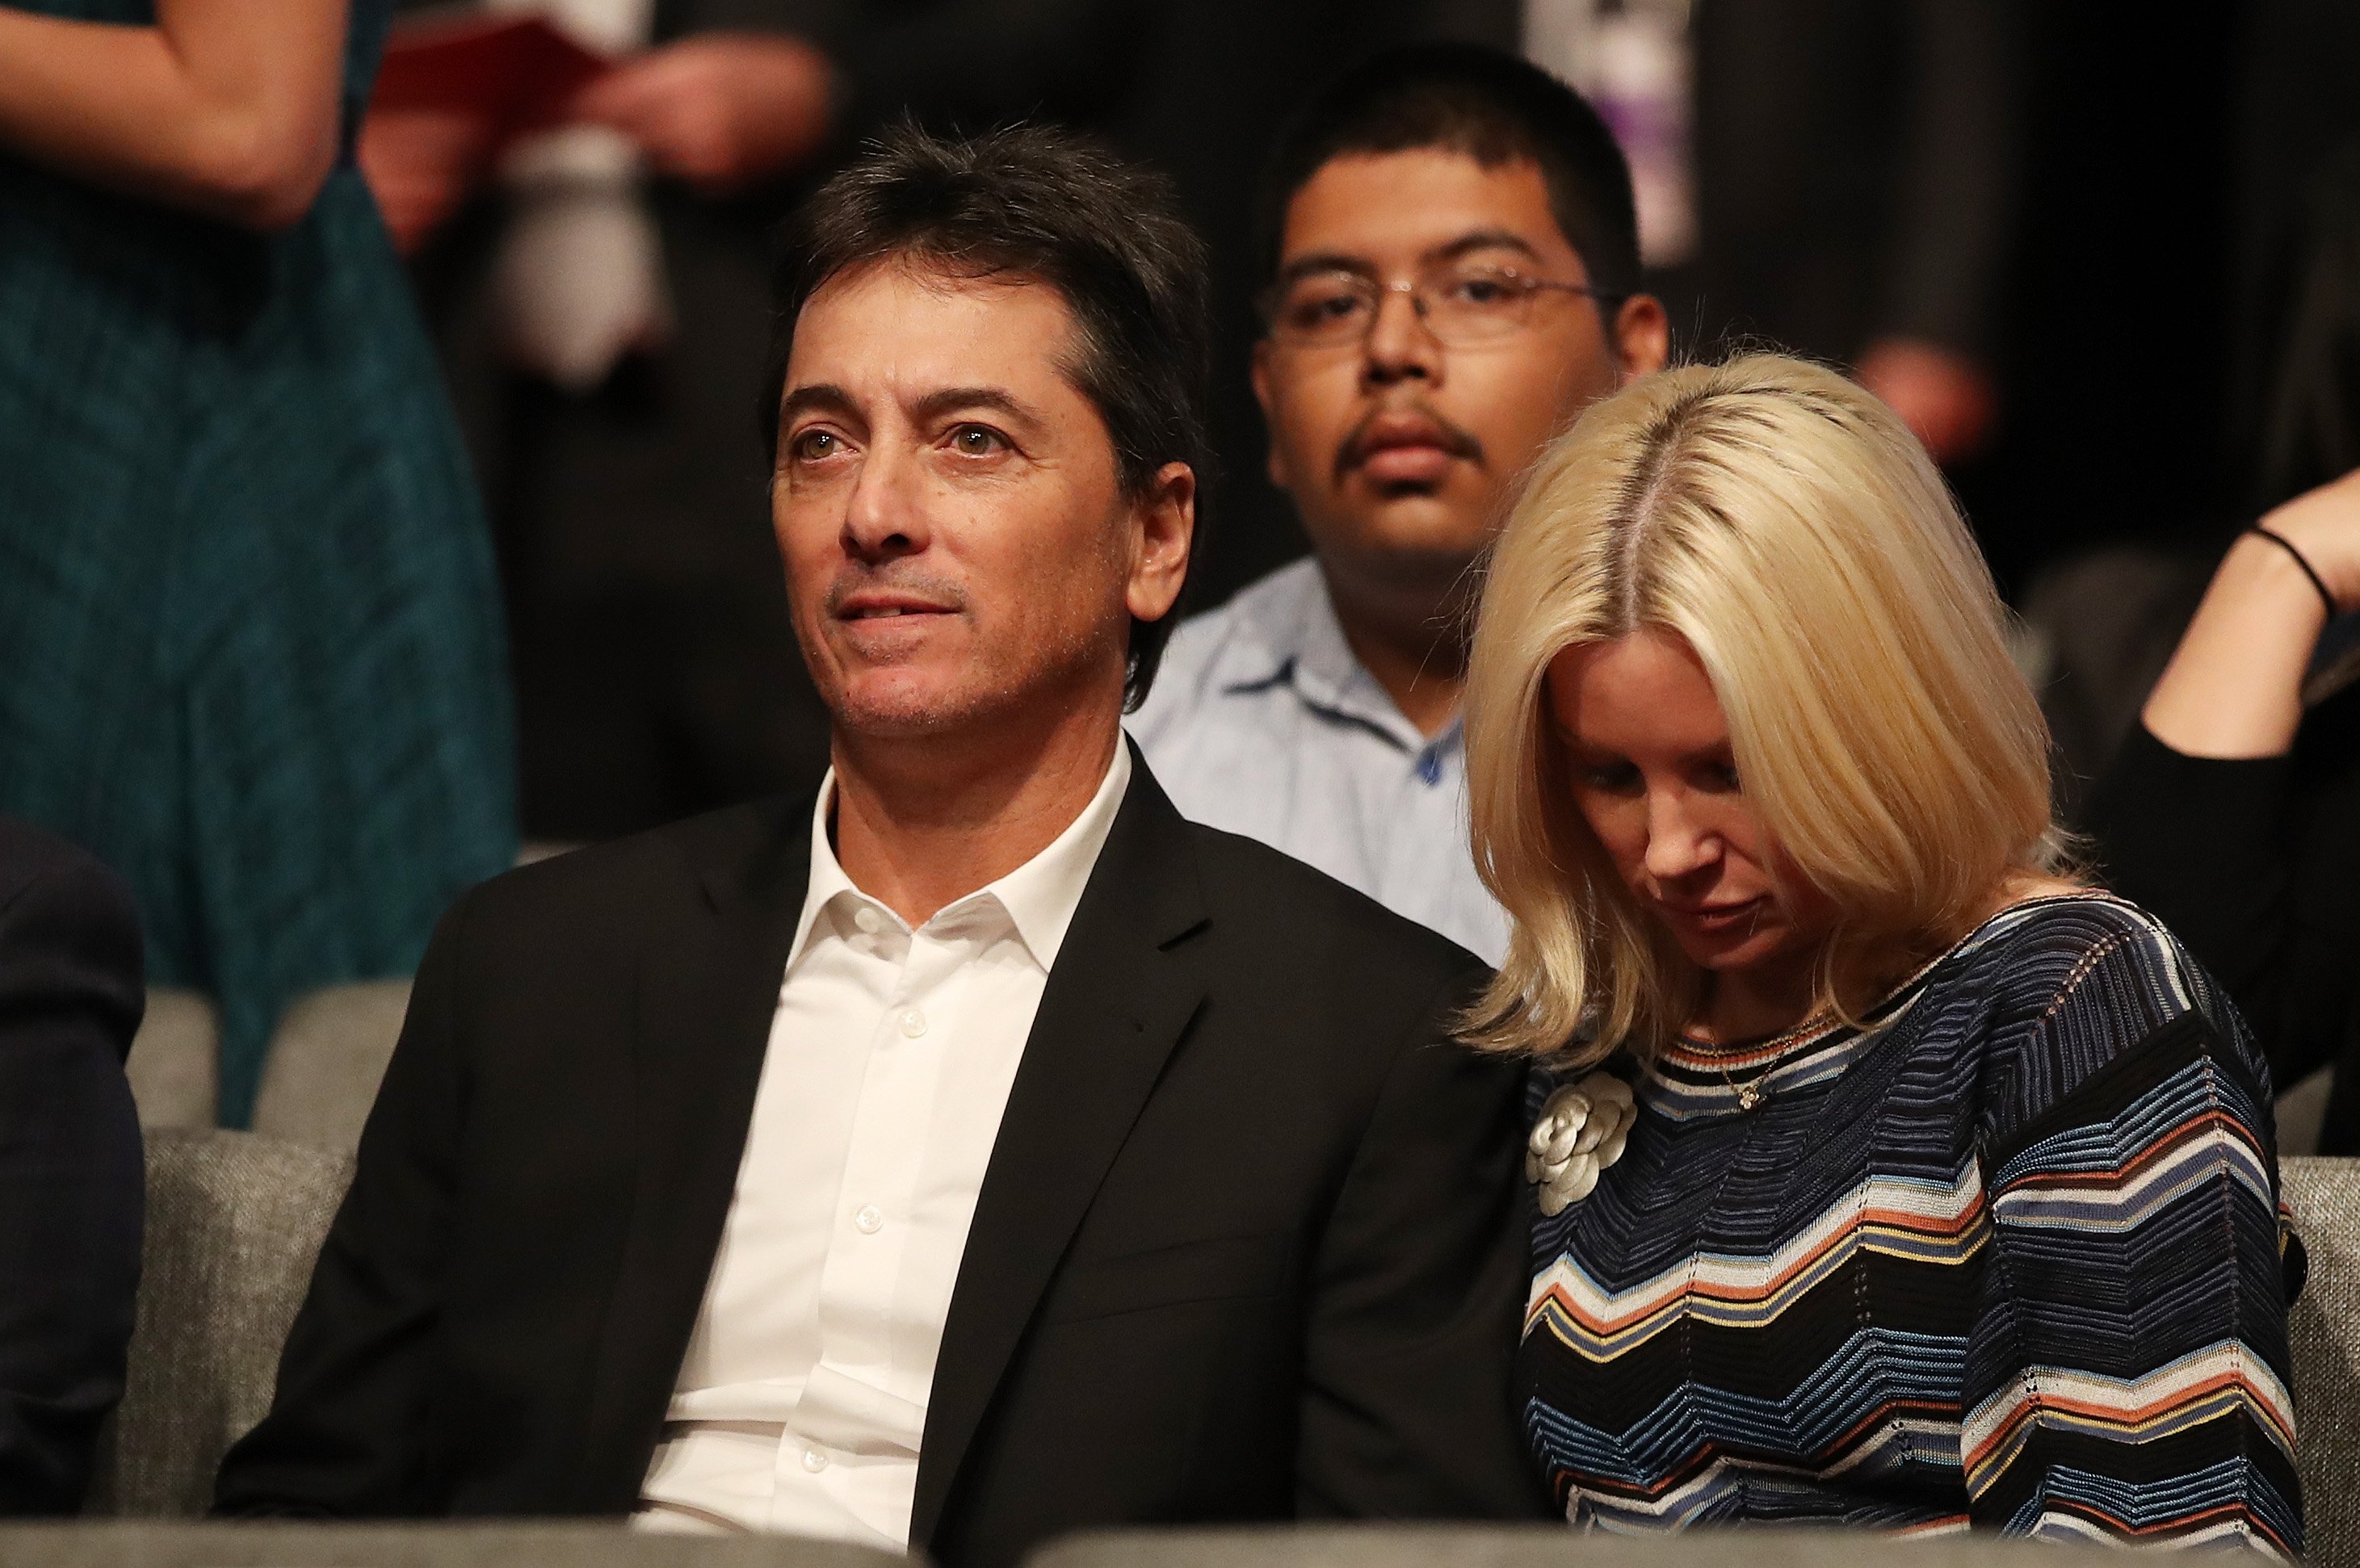 Scott Baio and Renee Sloan attending the third U.S. presidential debate at the Thomas & Mack Center on October 19, 2016 in Las Vegas, Nevada. / Source: Getty Images